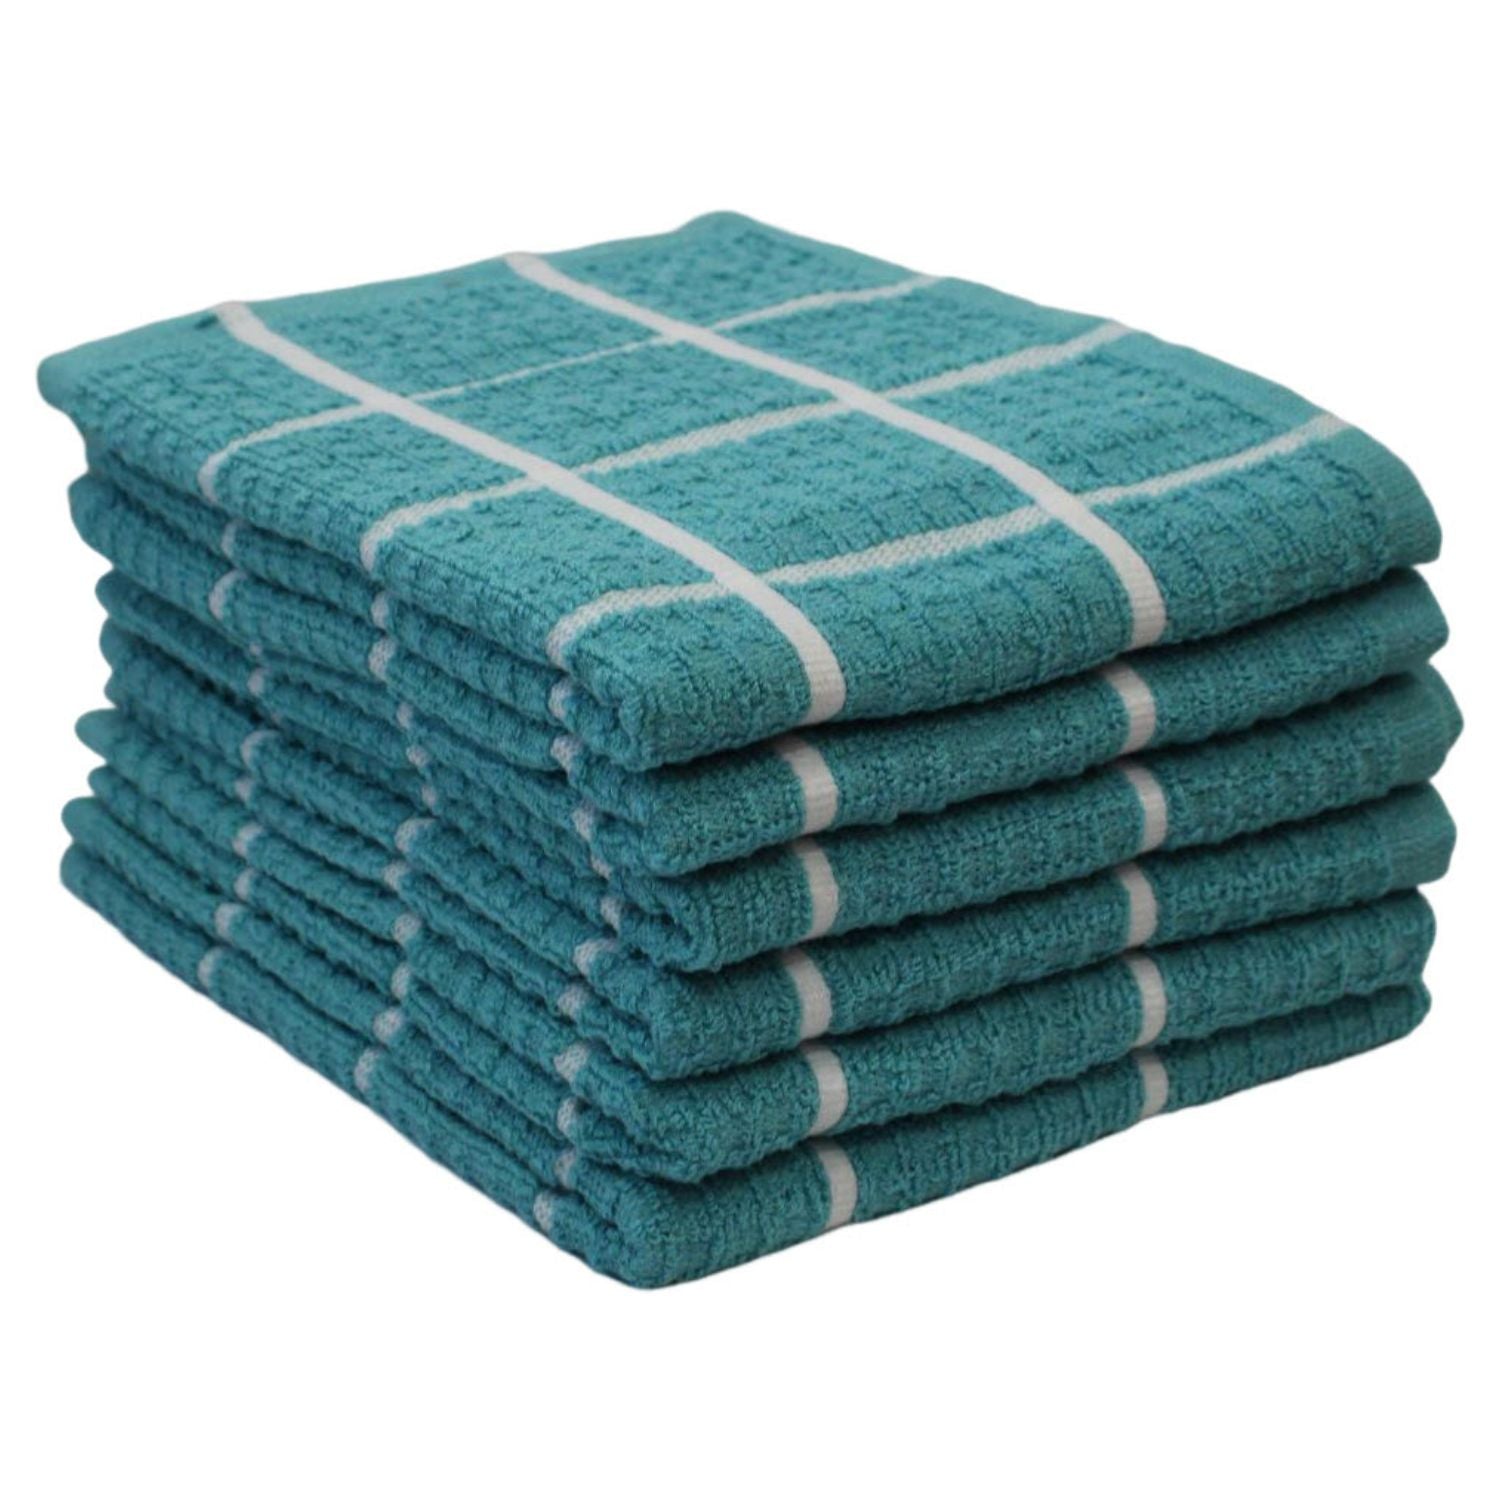 Lushomes Kitchen Cleaning Cloth, Terry Cotton Dish Machine Washable Towels for Home Use, 6 Pcs Teal Blue Checks Hand Towel, Pack of 6 Towel, 16x26 Inches, 360 GSM  (40x65 Cms, Set of 6,  )